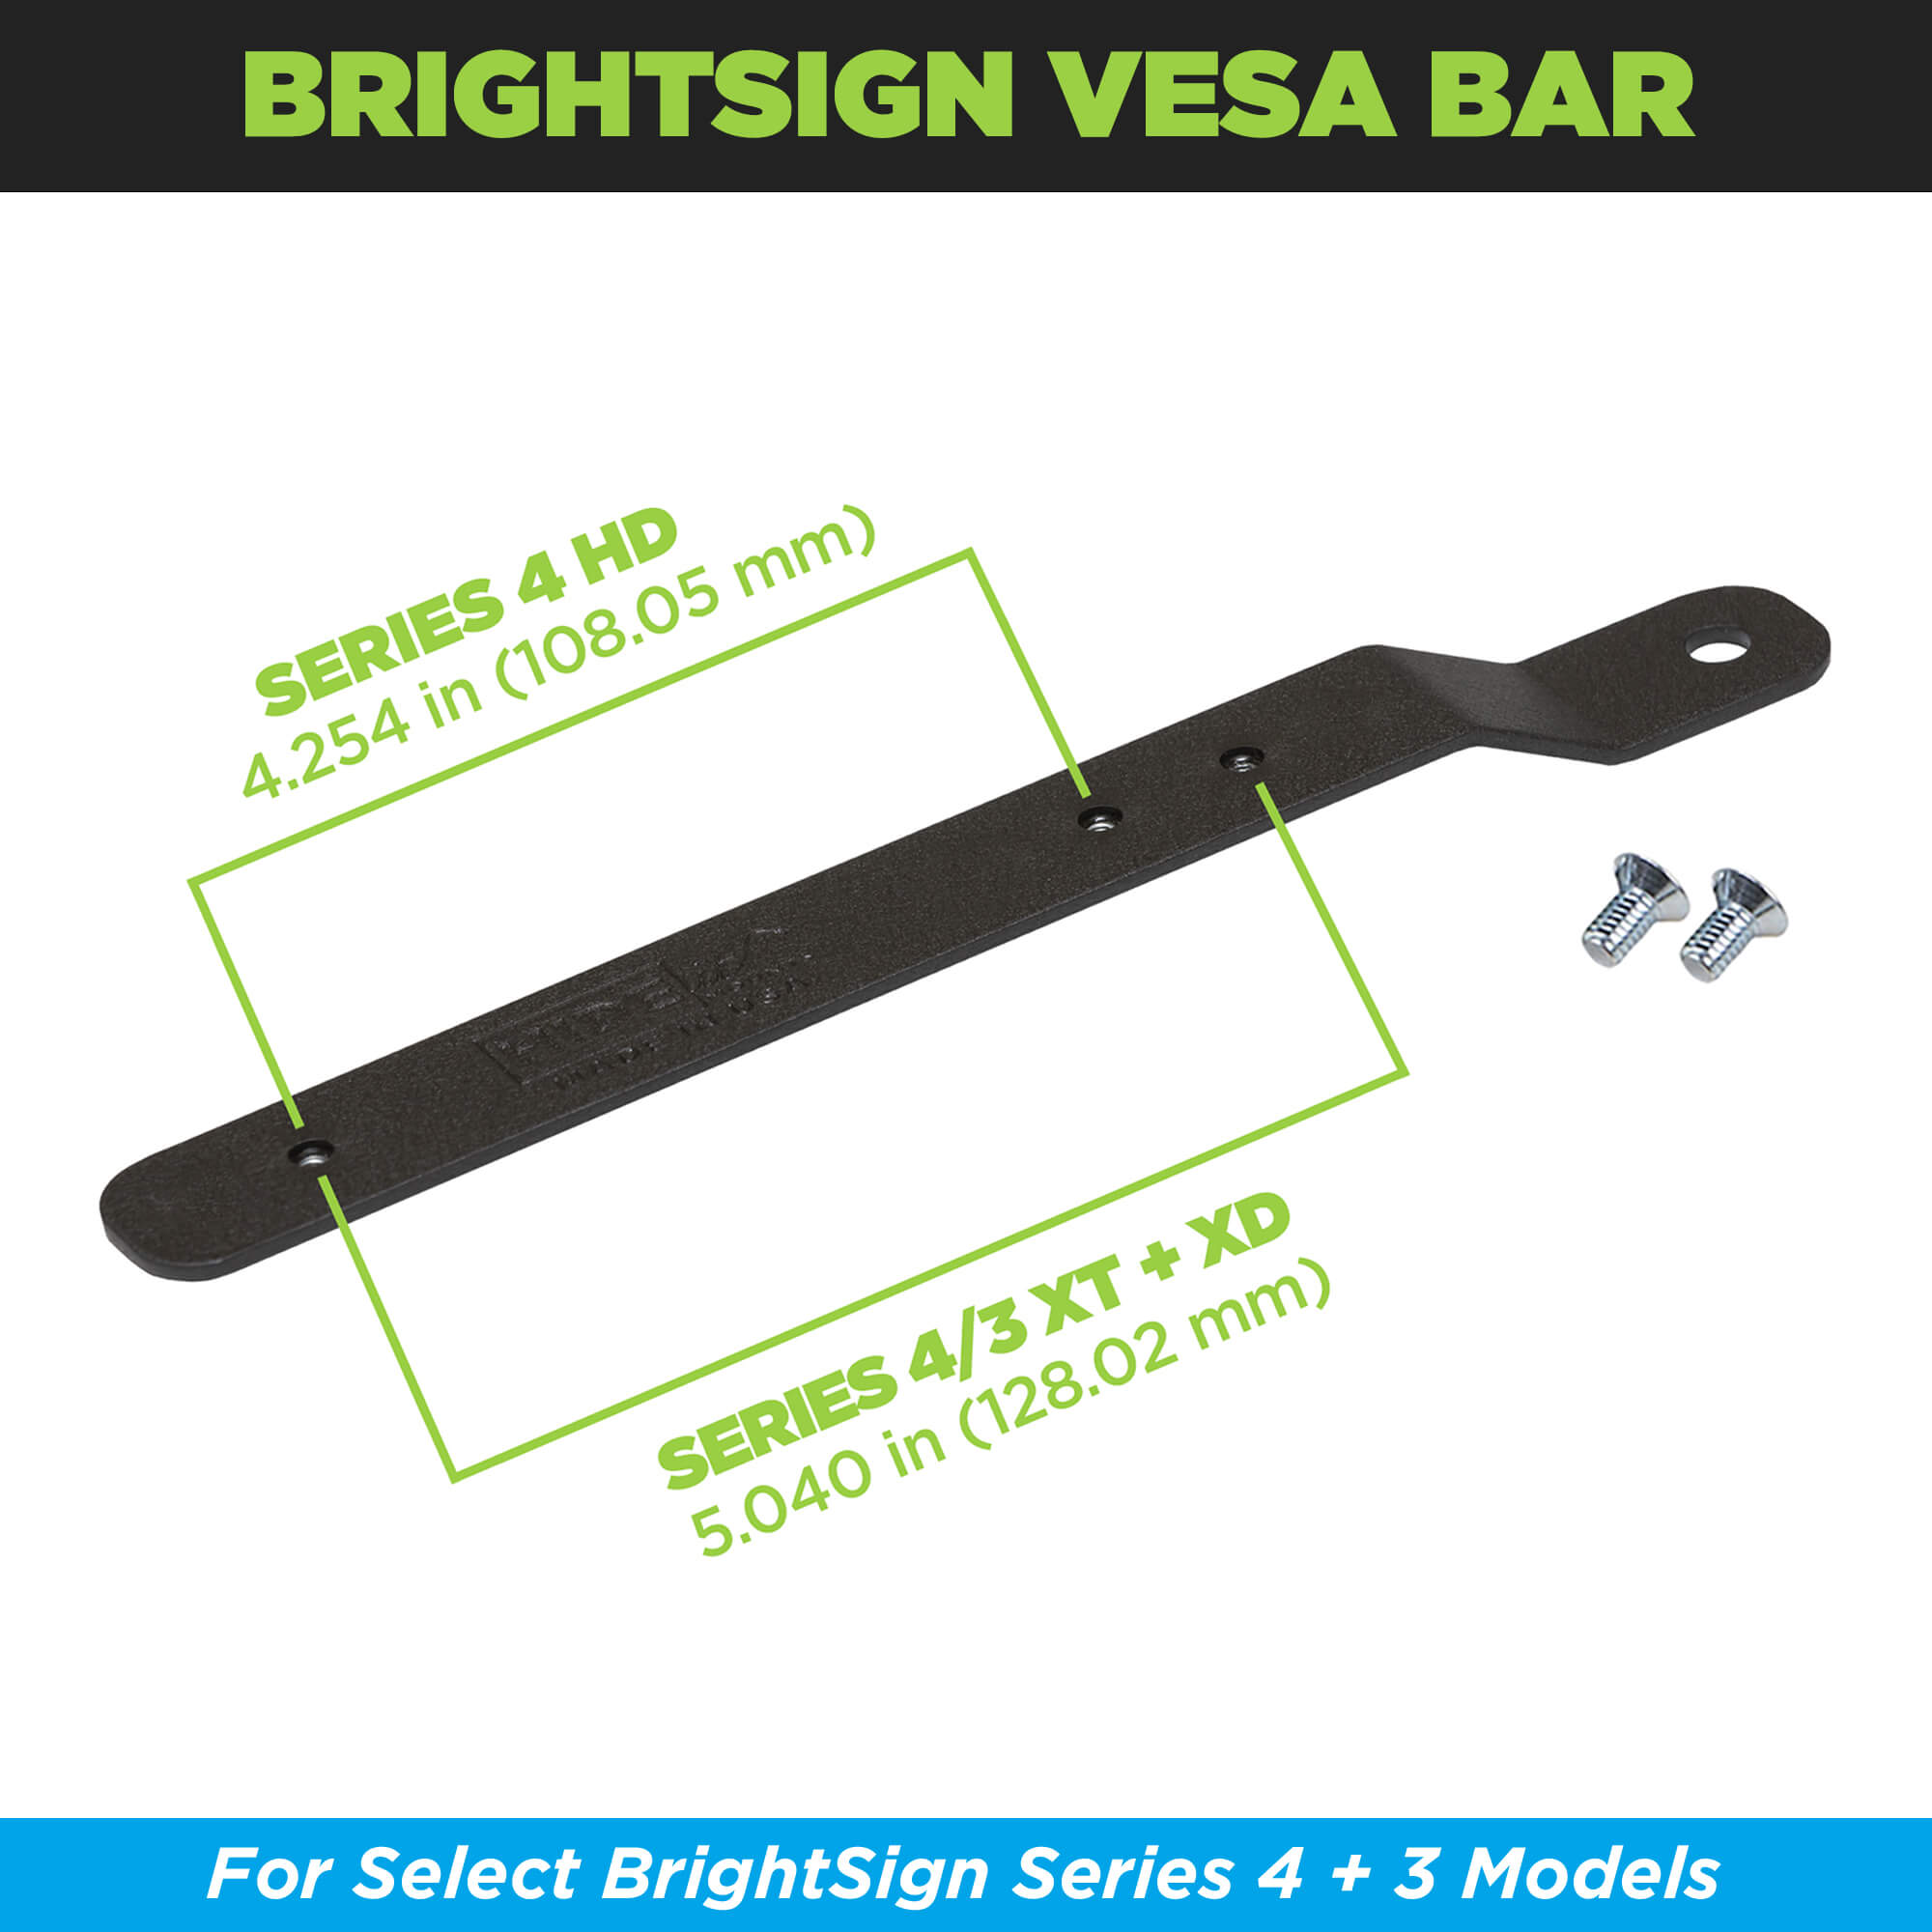 The HIDEit BrightSign Player Adapter Bar works with select Series 4 / Series 3 models including: HD4, XD4, XT4, XD3 and XT3.